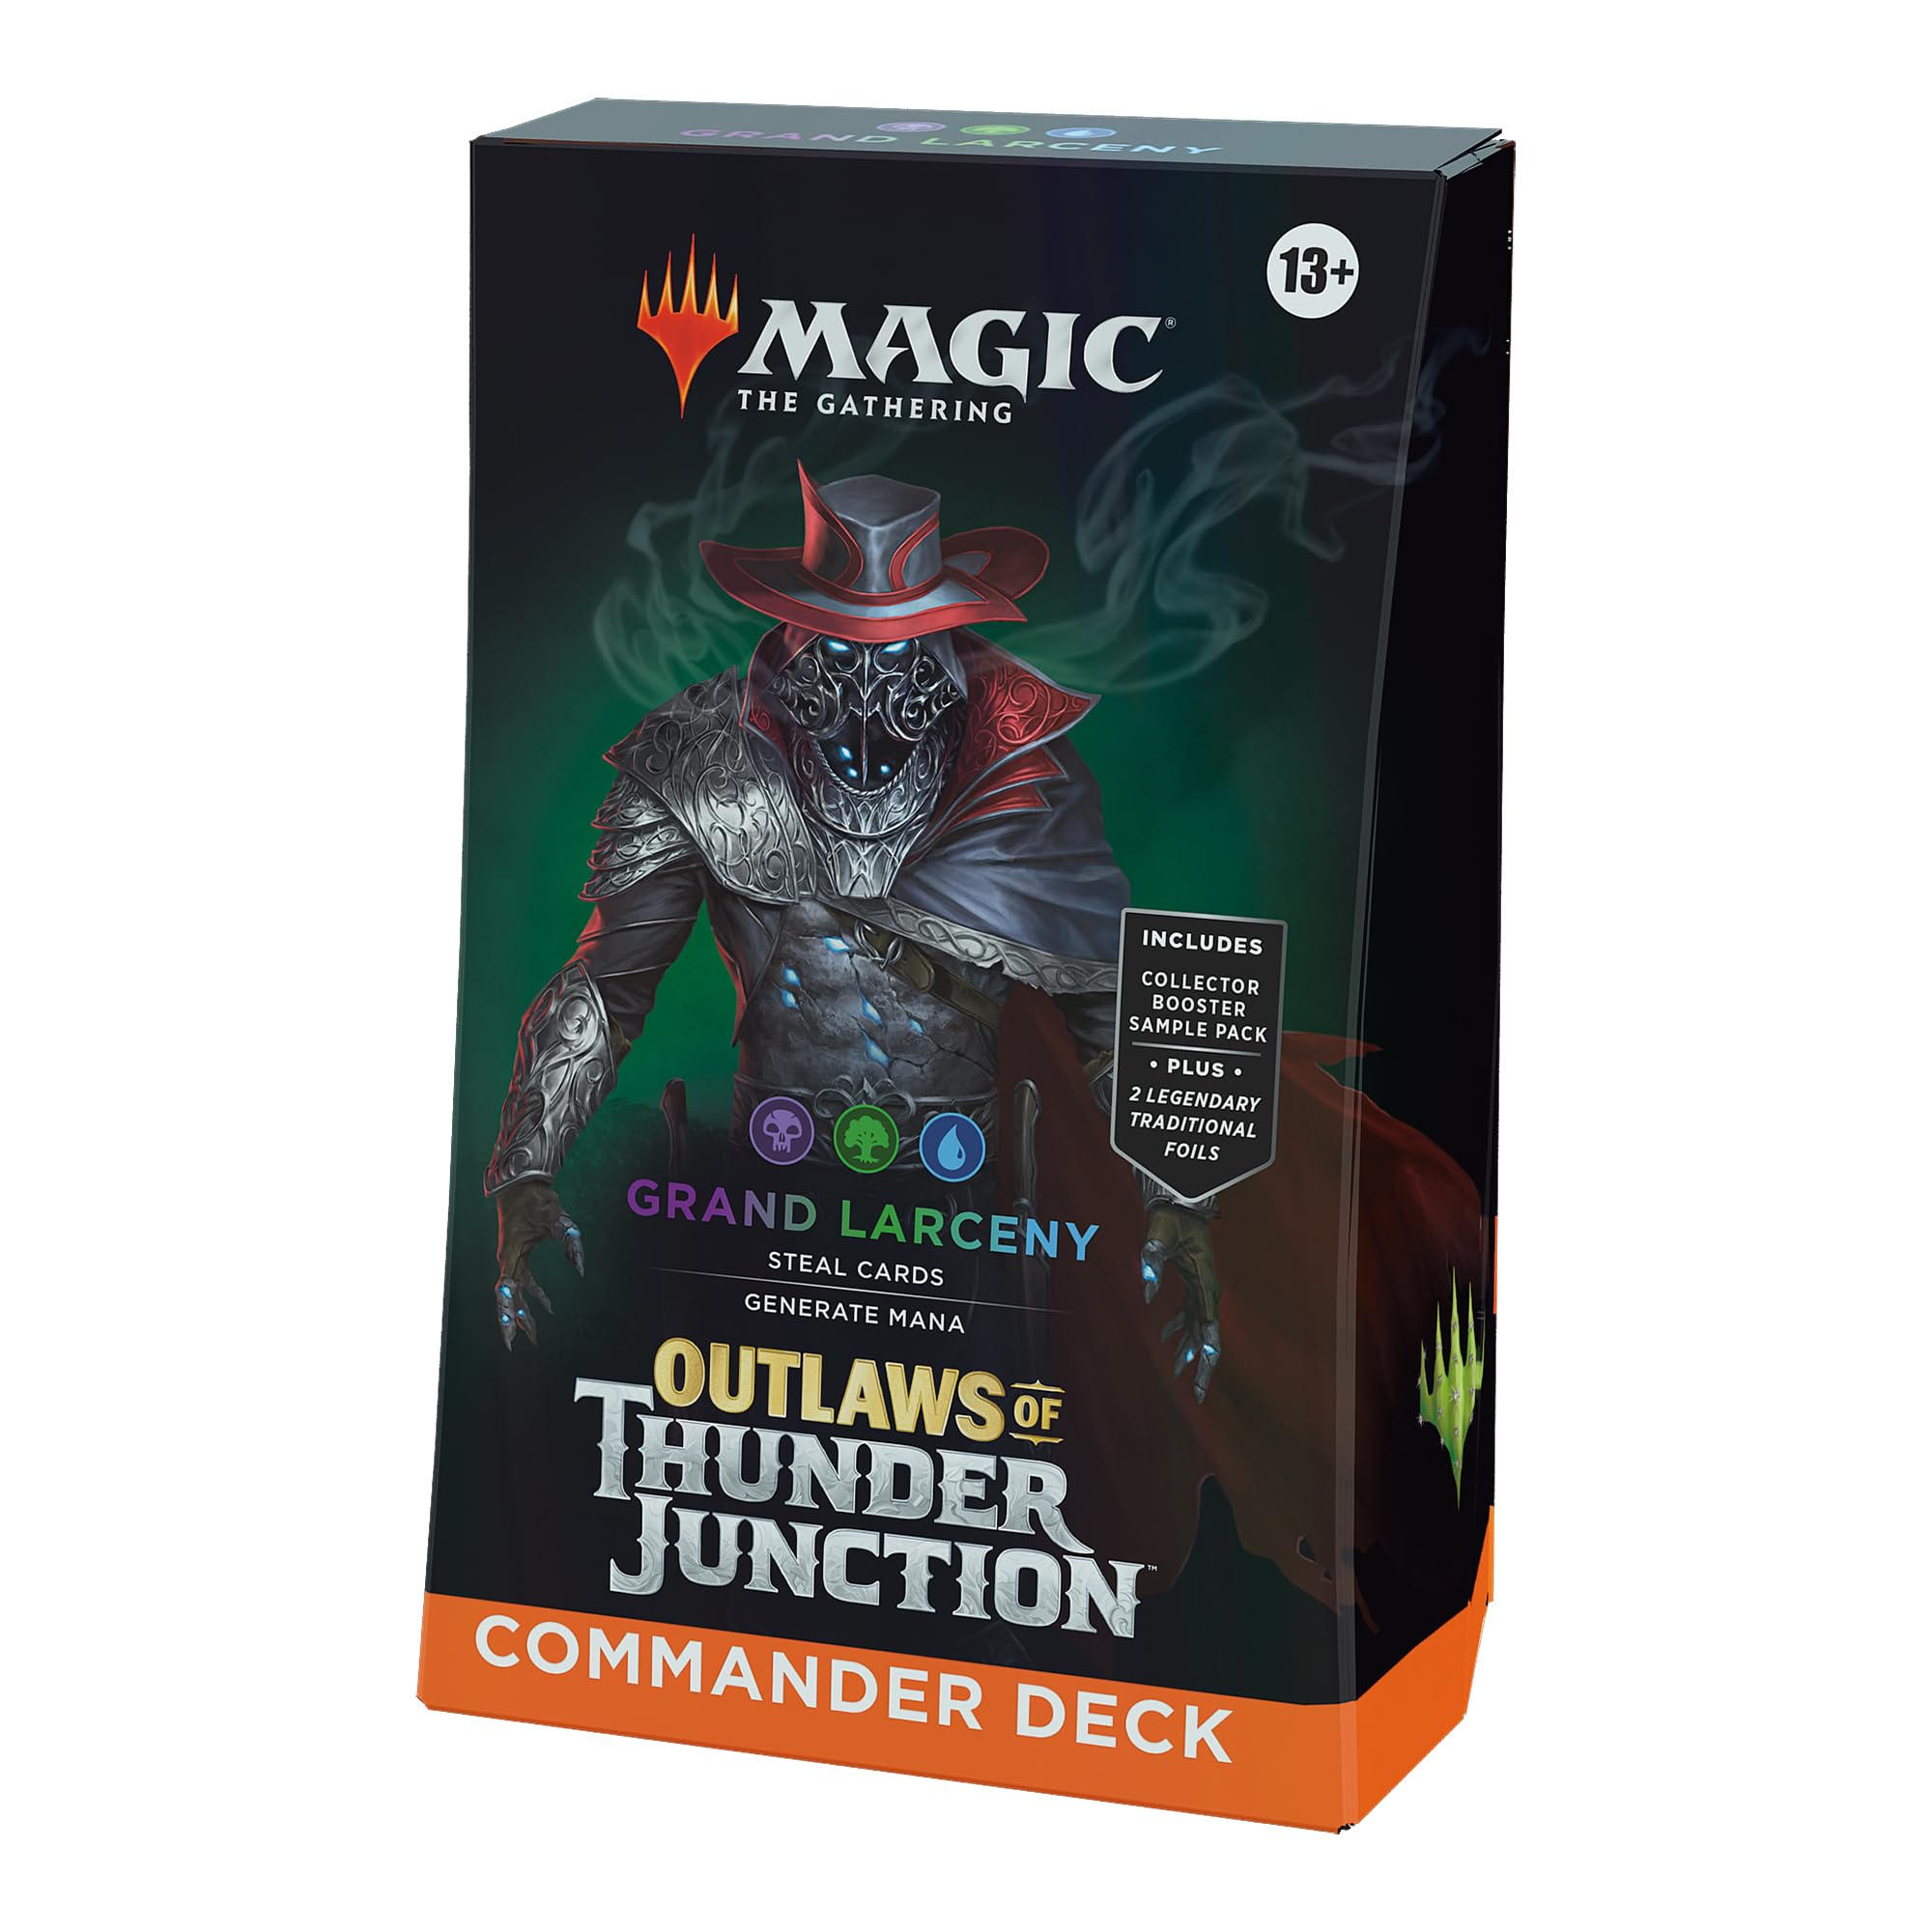 Magic: The Gathering Outlaws of Thunder Junction Commander Deck - Grand Larceny (100-Card Deck, 2-Card Collector Booster Sample Pack + Accessories)